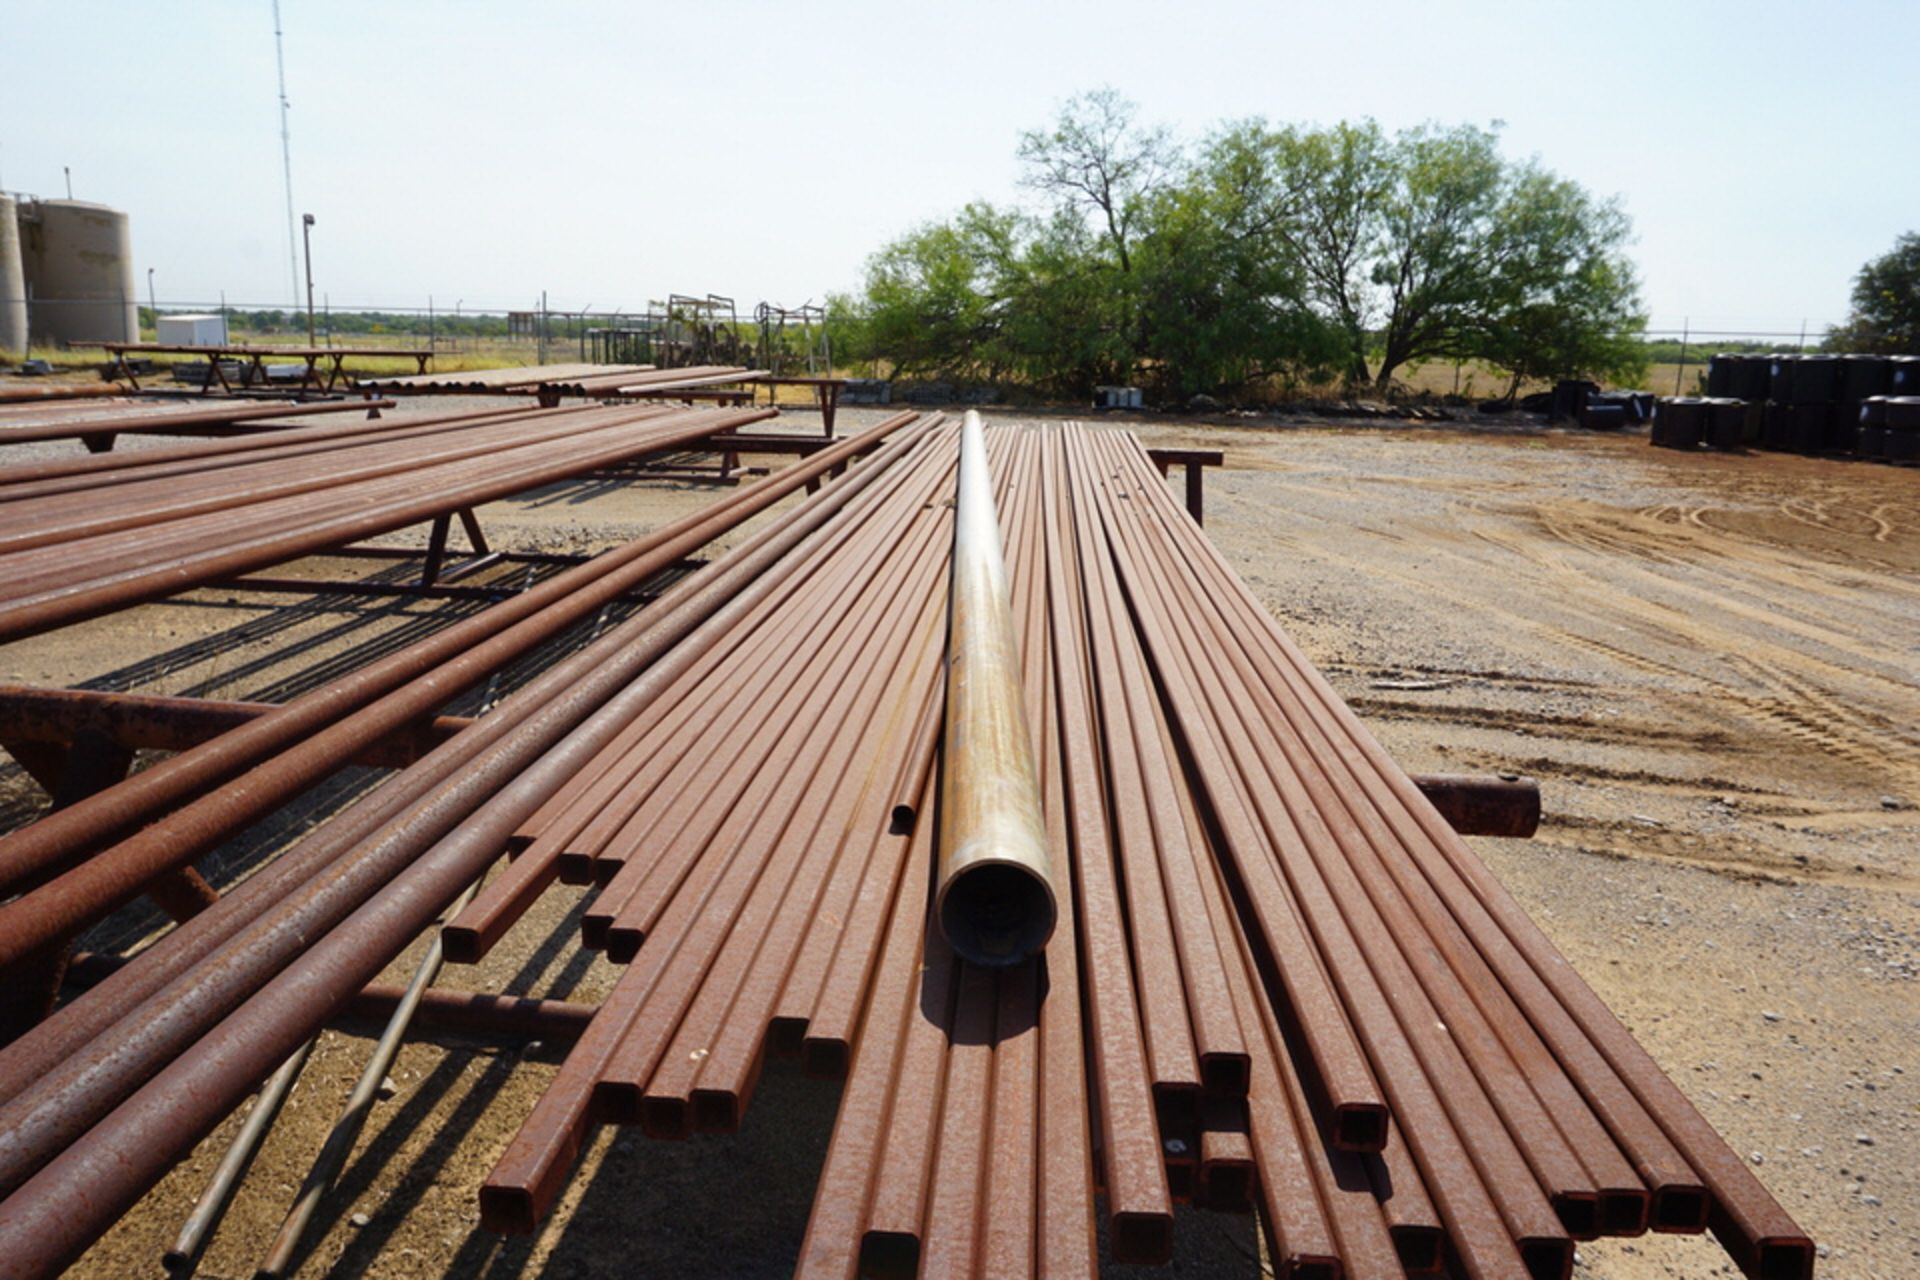 STEEL PIPE 2 1/2" TO 3 1/2" DIA, 1" SQ TUBING, 20' LG - Image 8 of 8